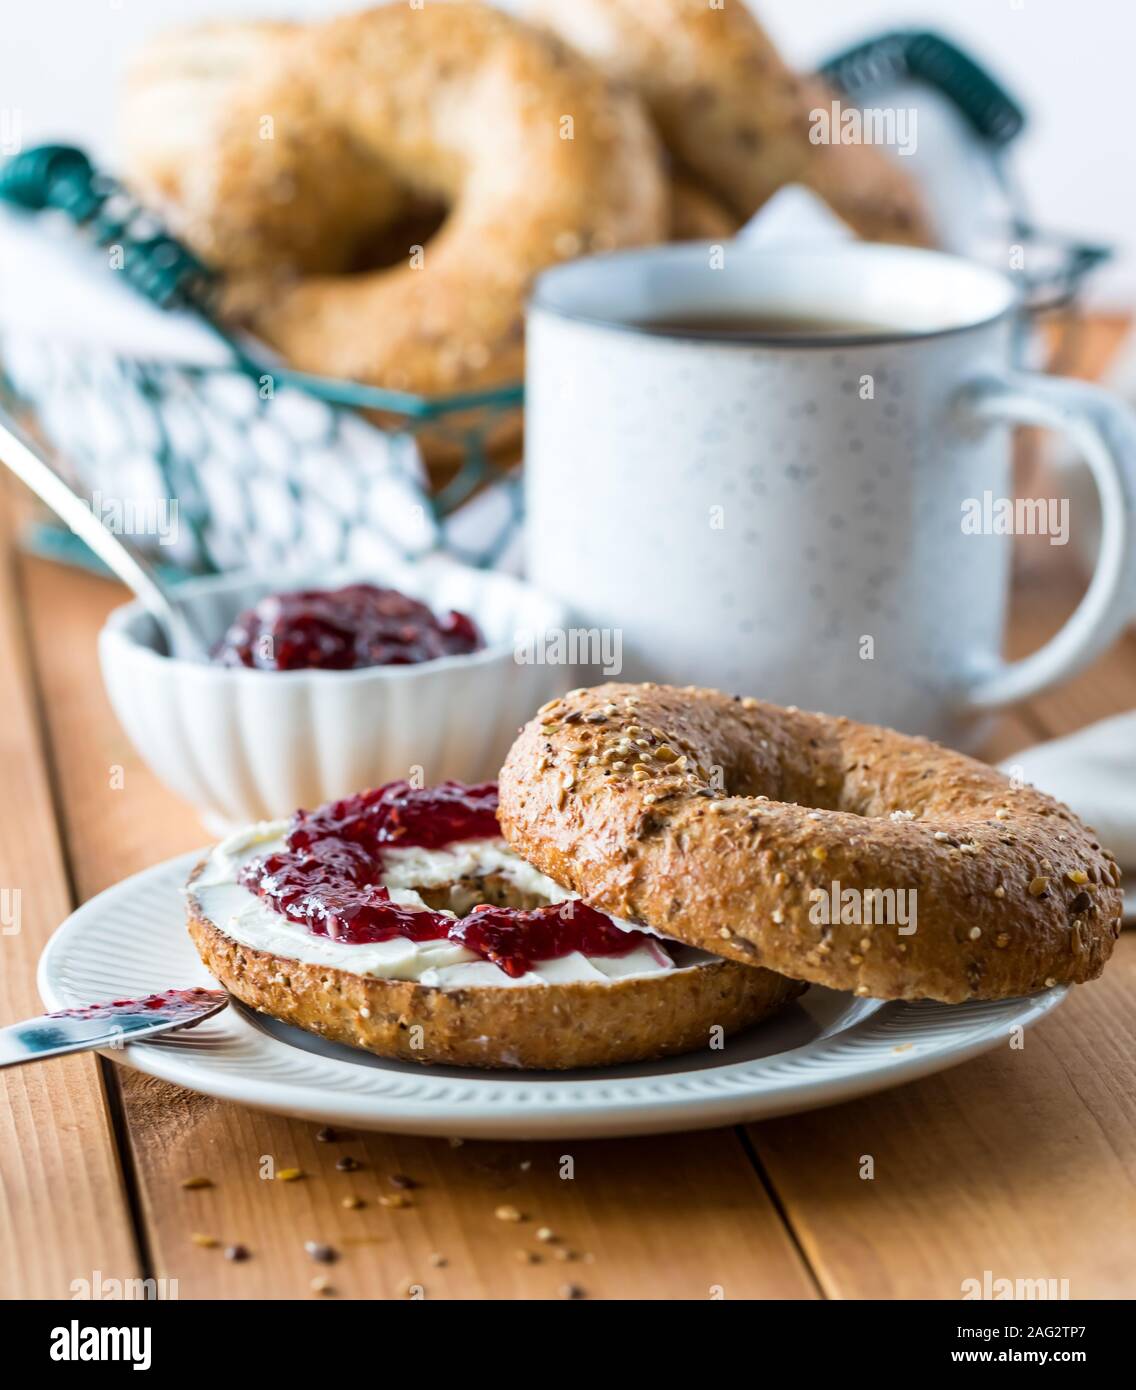 A multi grain bagel with cream cheese and jam. Stock Photo